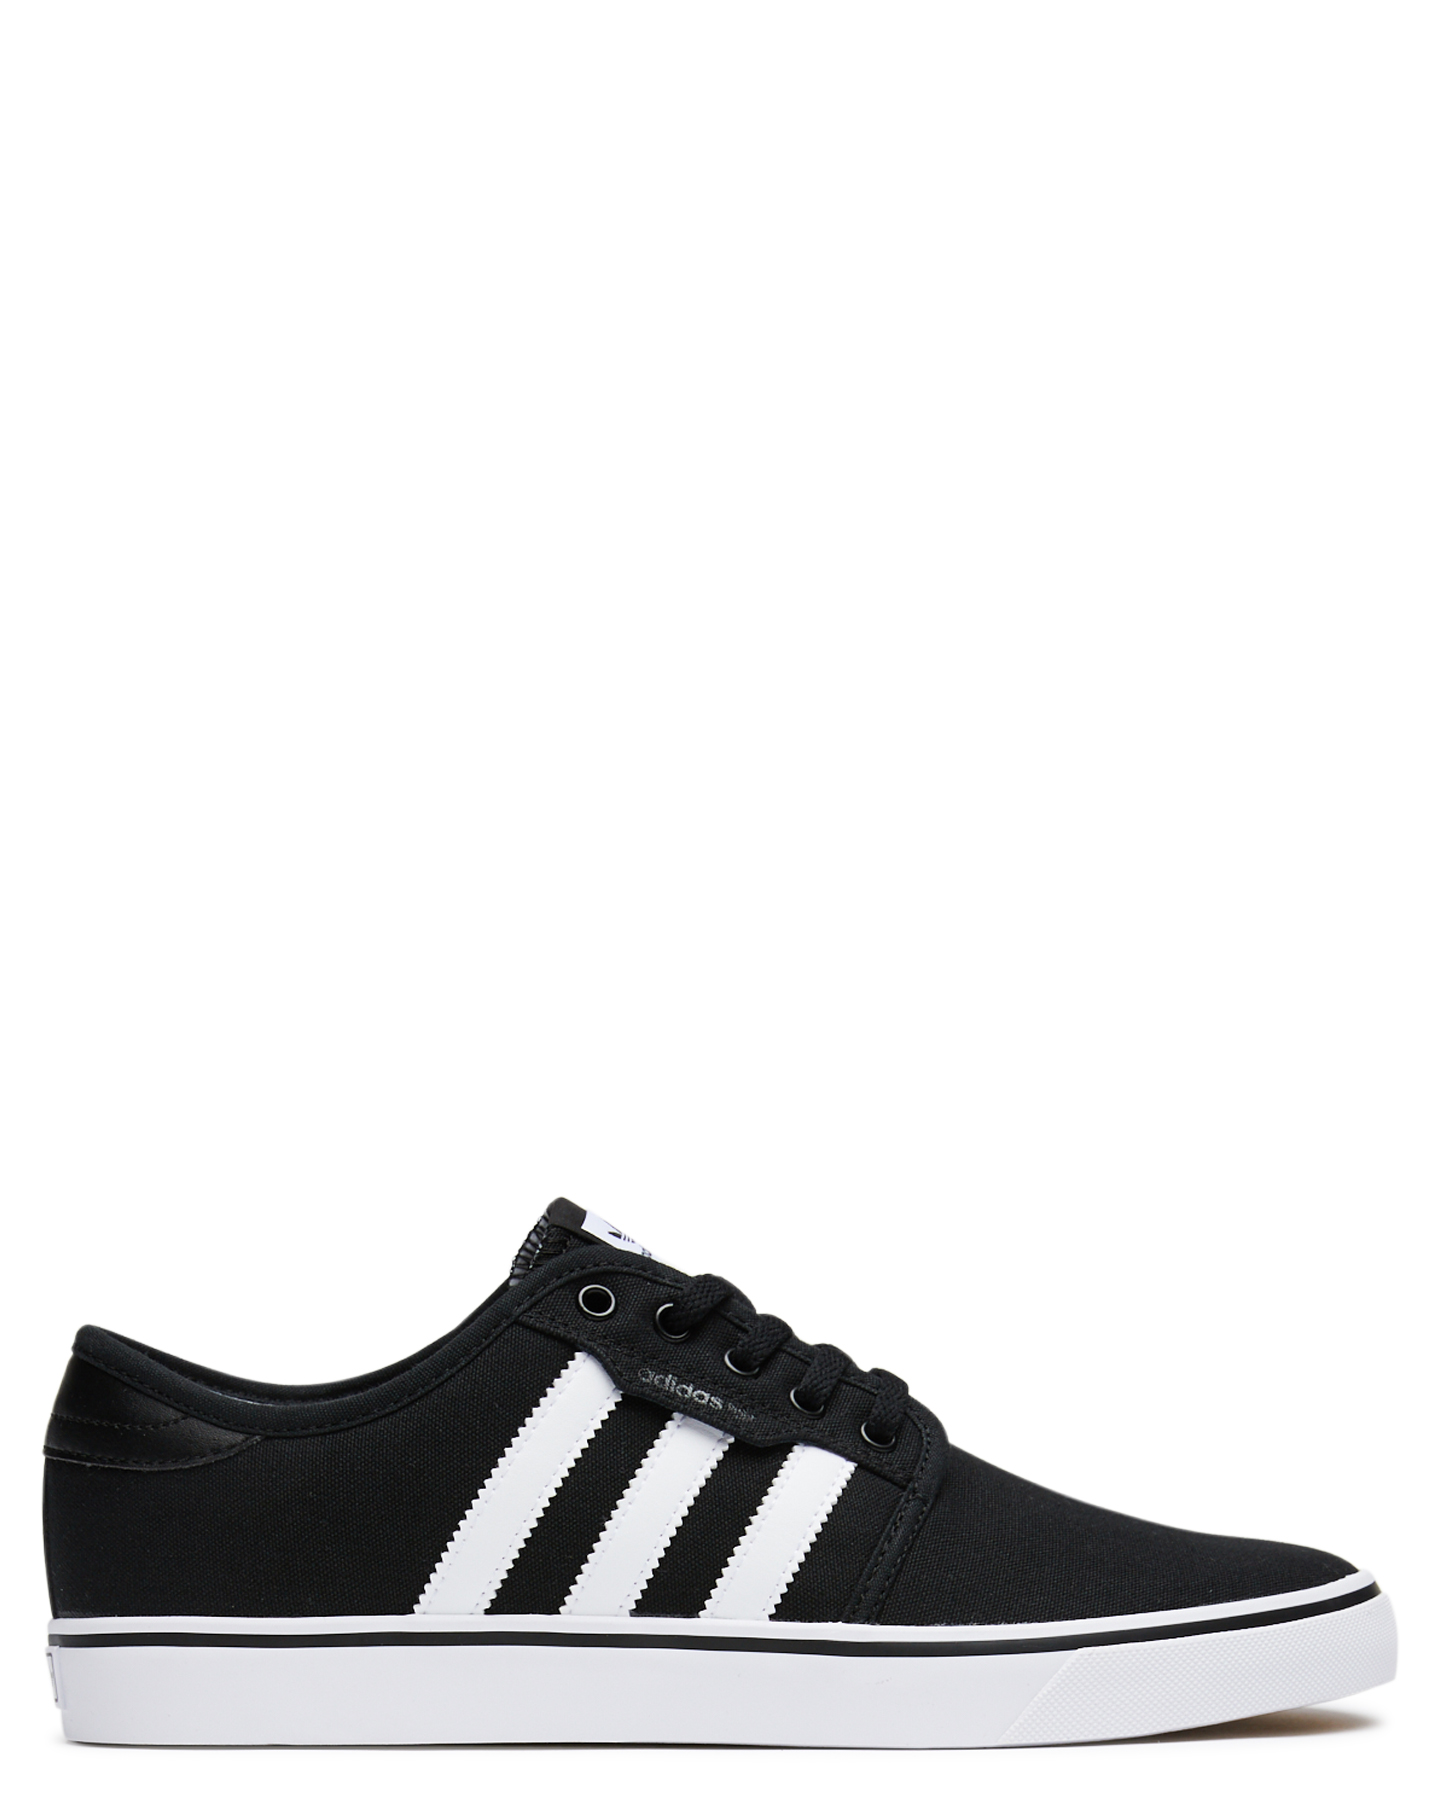 black and white adidas sneakers womens